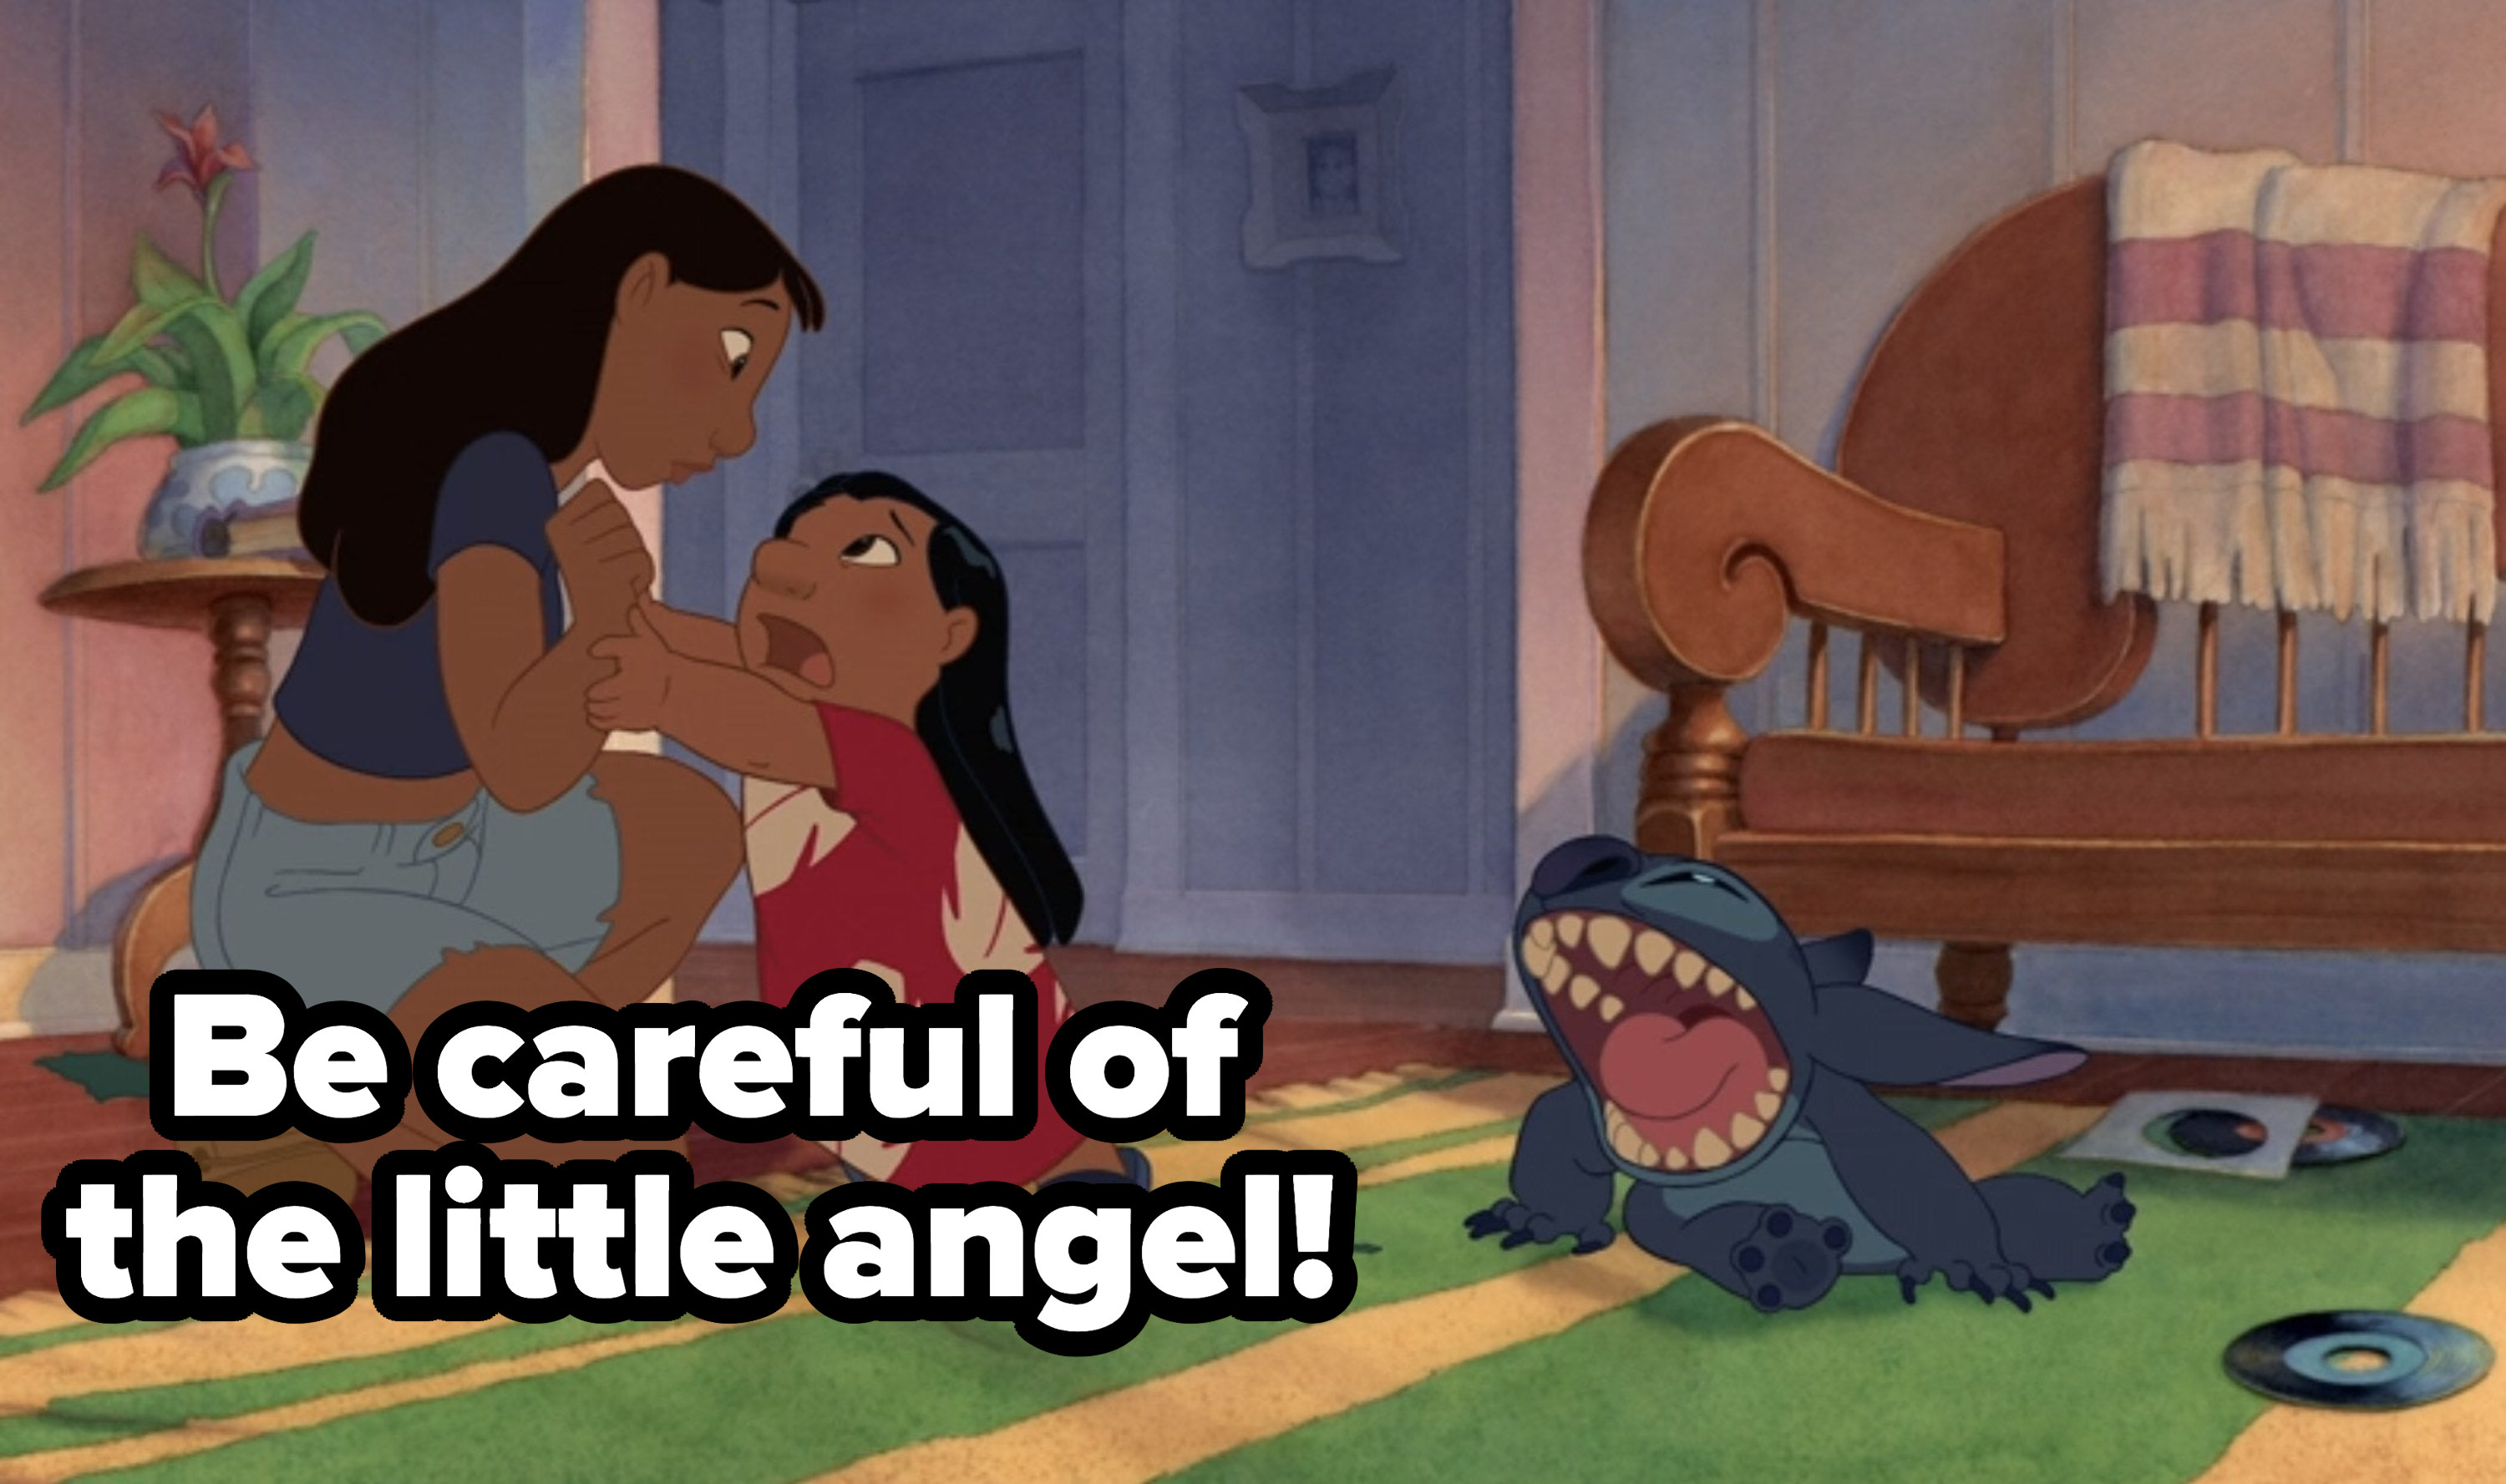 Lilo saying be careful of the little angel about Stitch